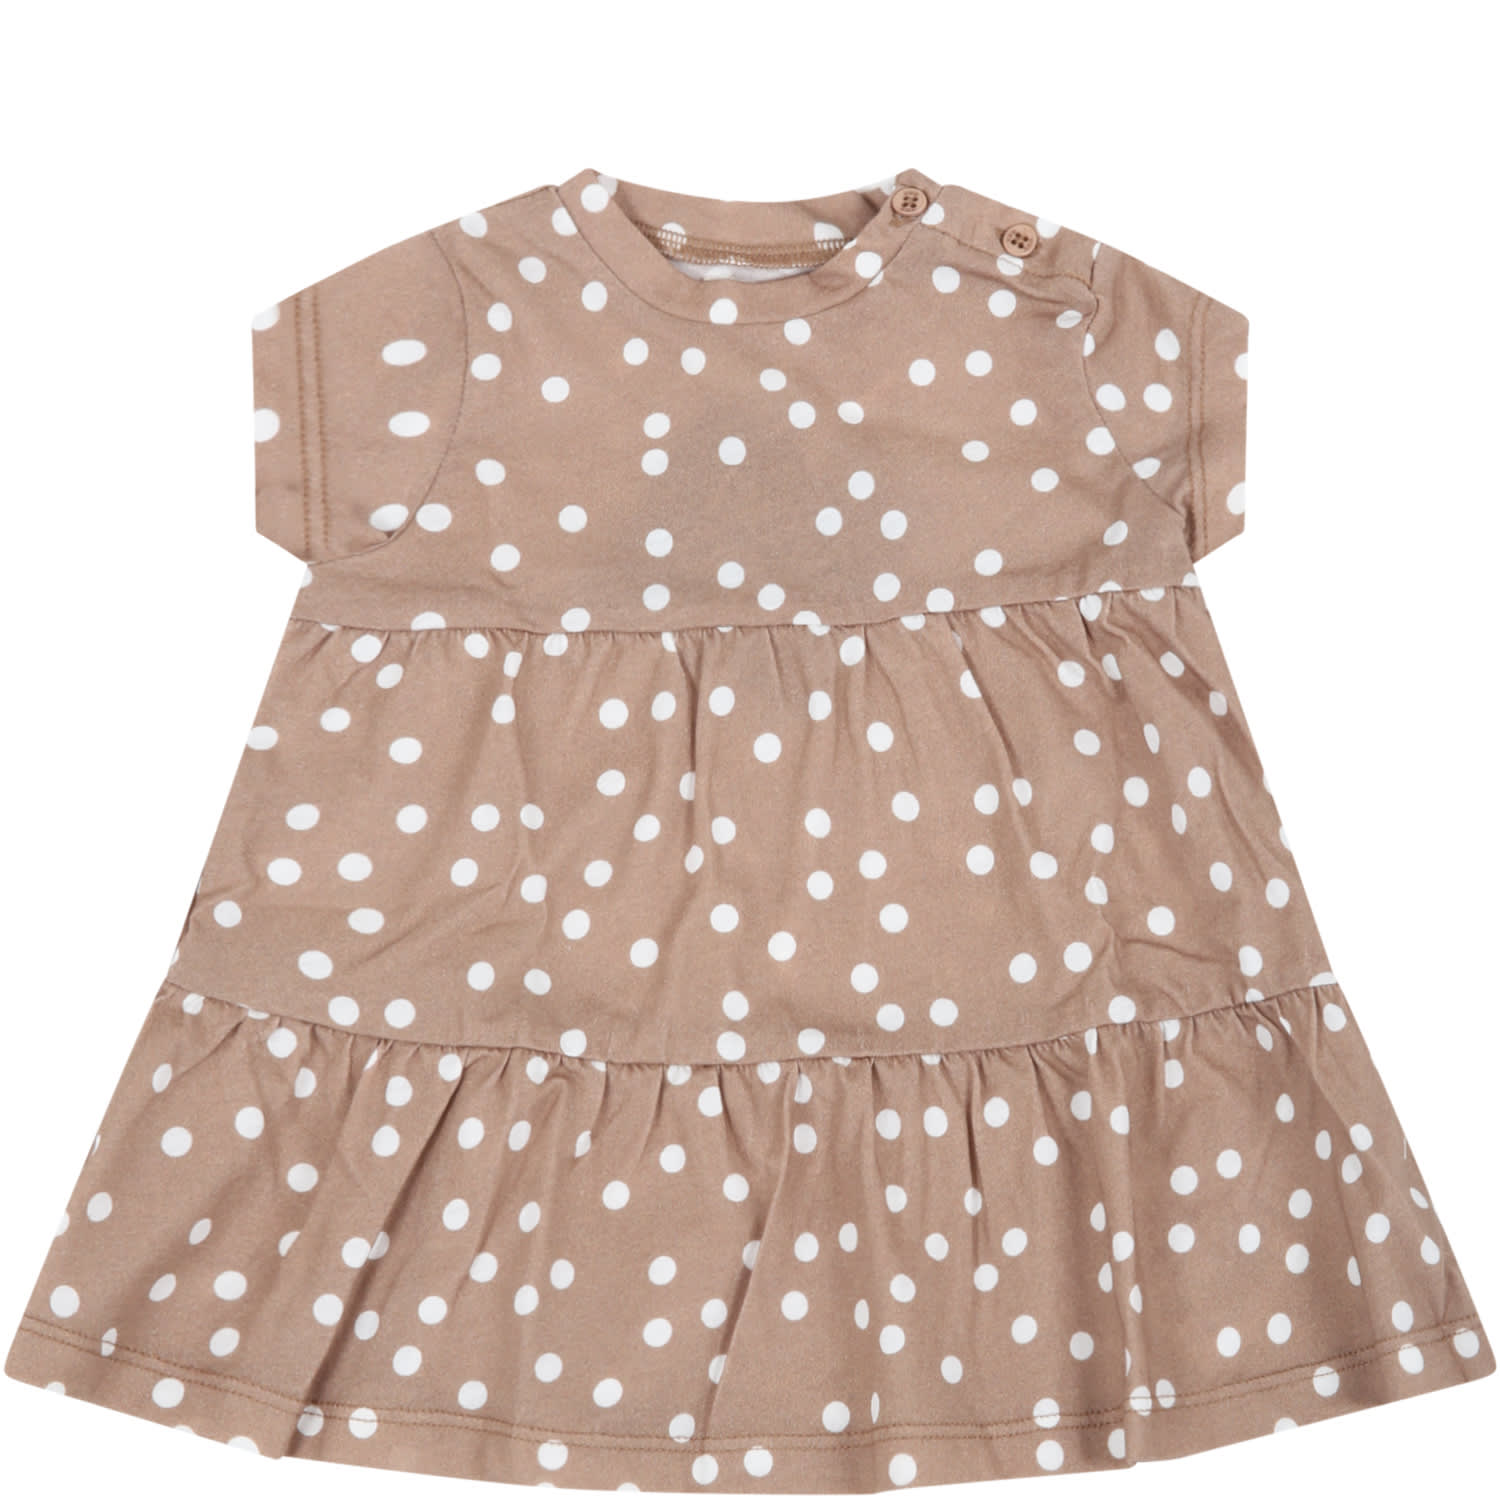 Douuod Beige Dress For Babygirl With Polka-dots